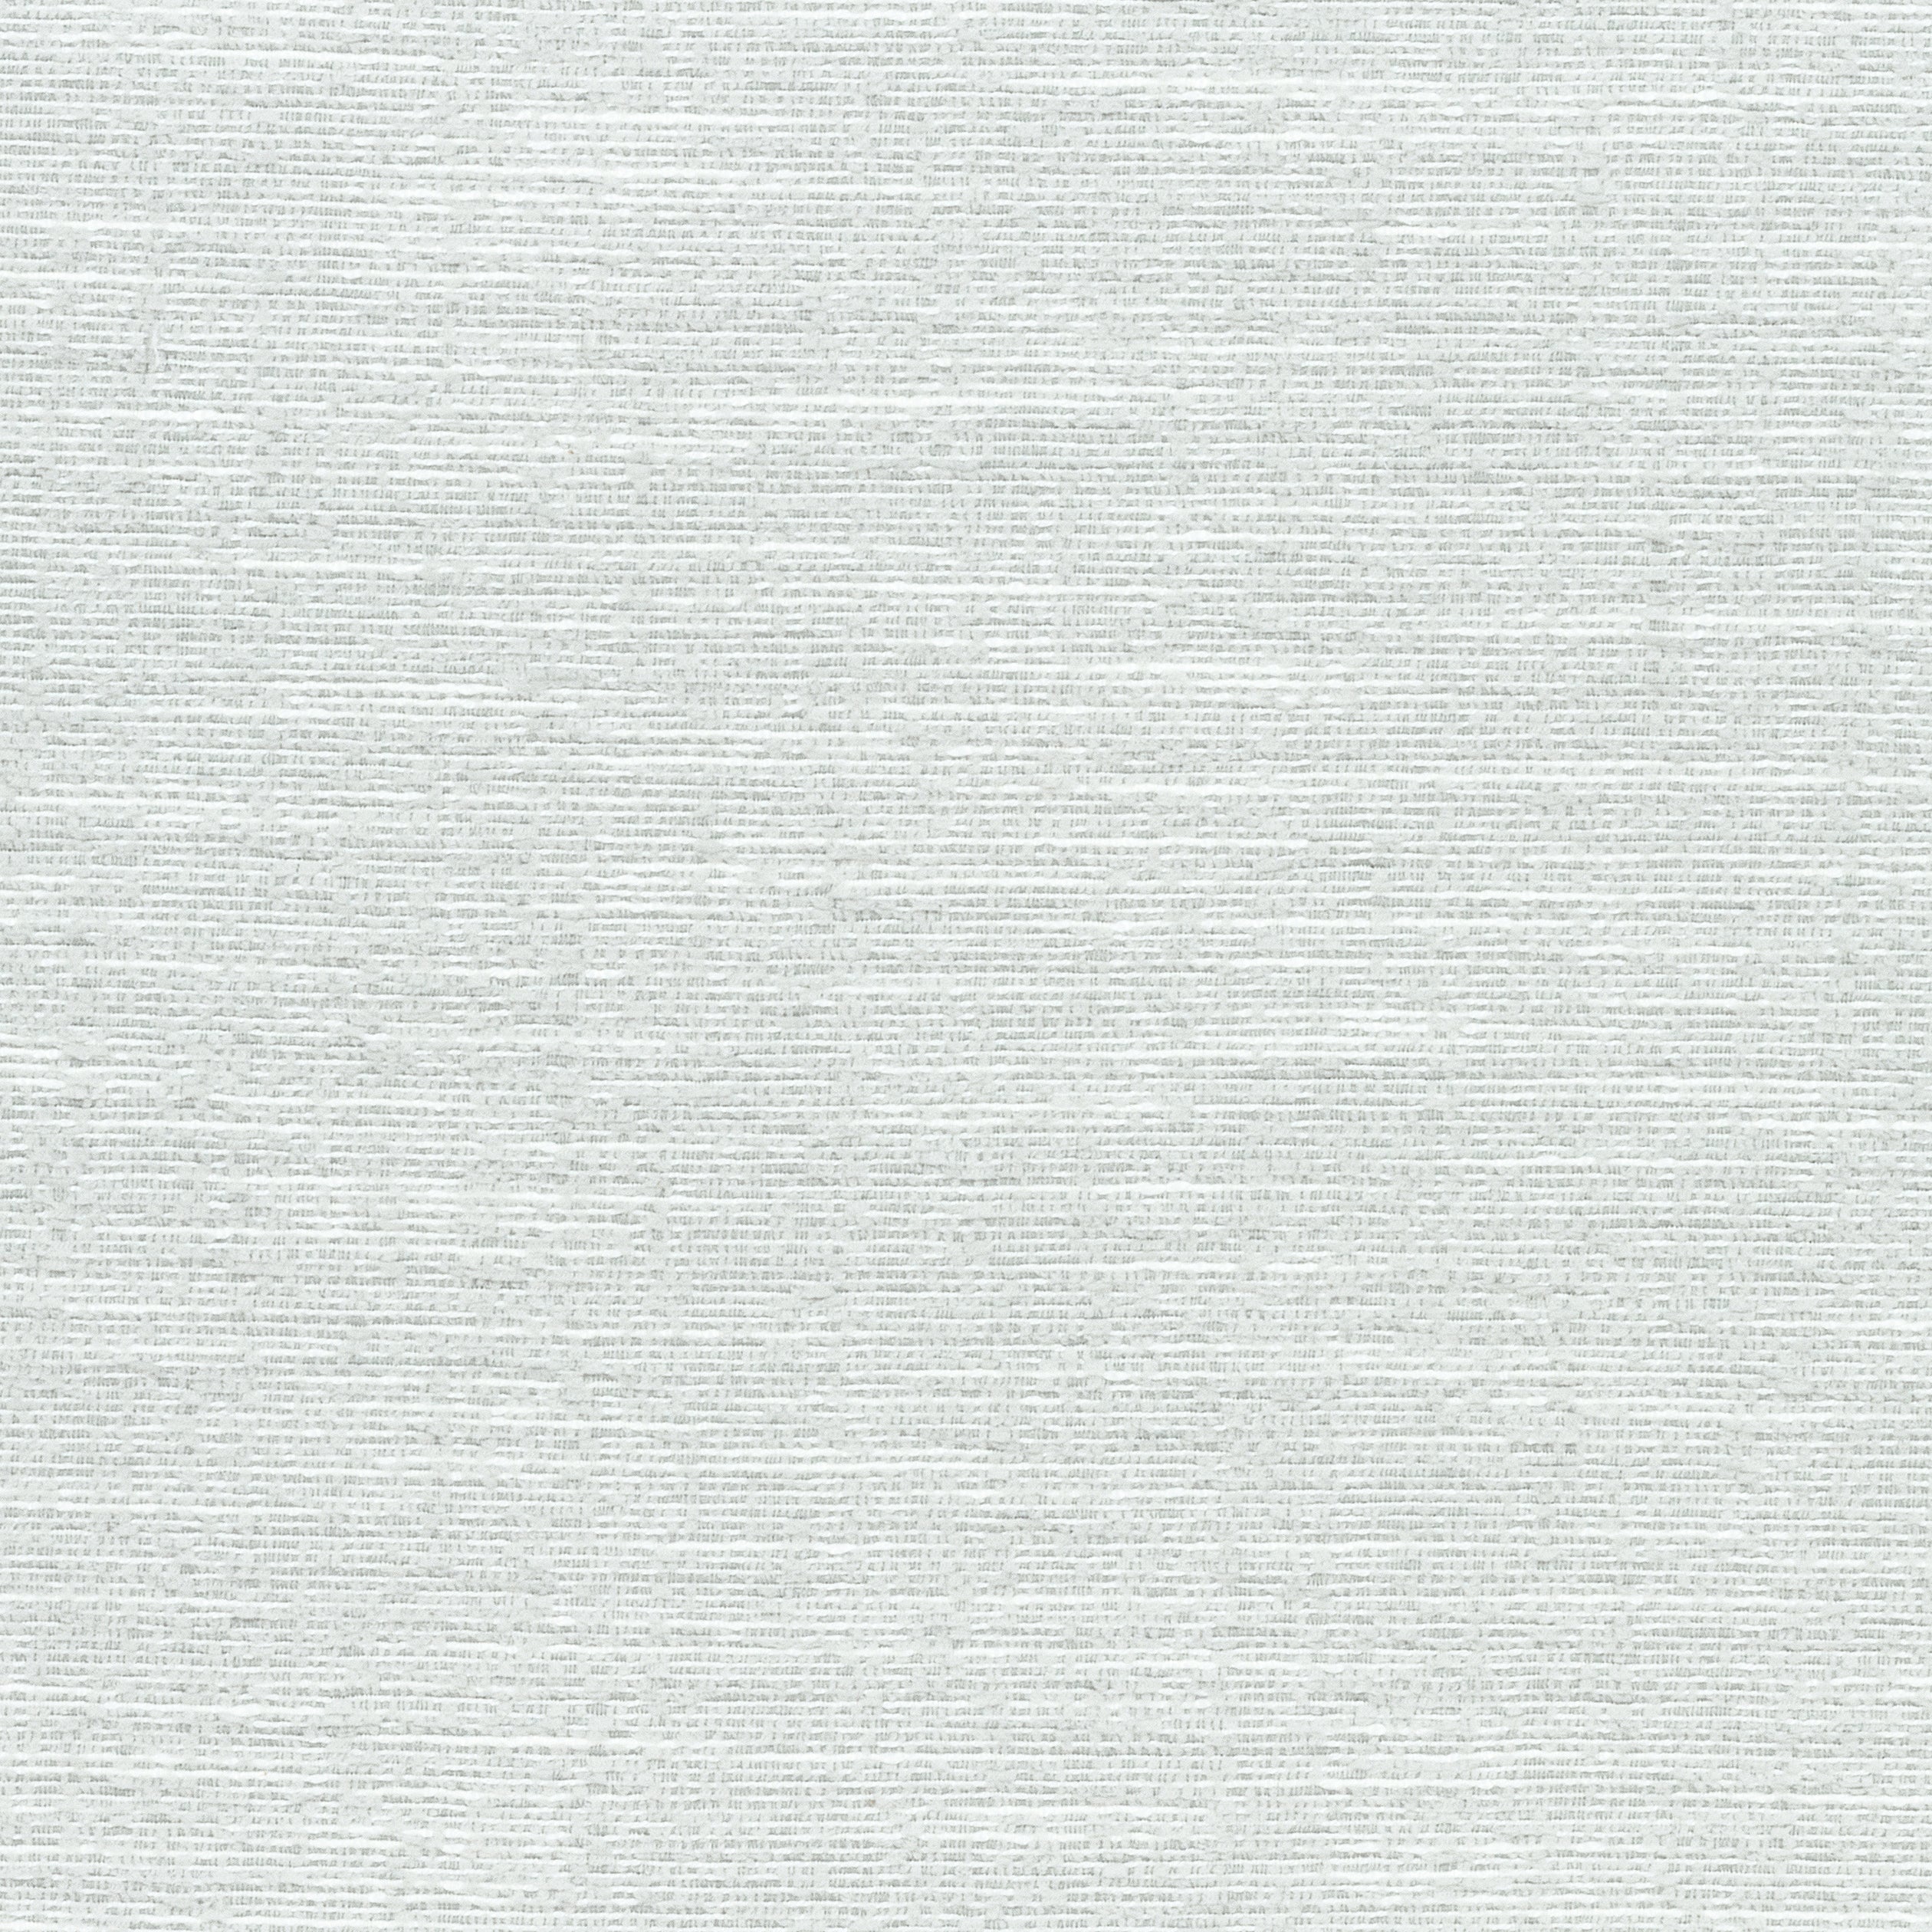 Freeport fabric in sterling color - pattern number W74615 - by Thibaut in the Festival collection